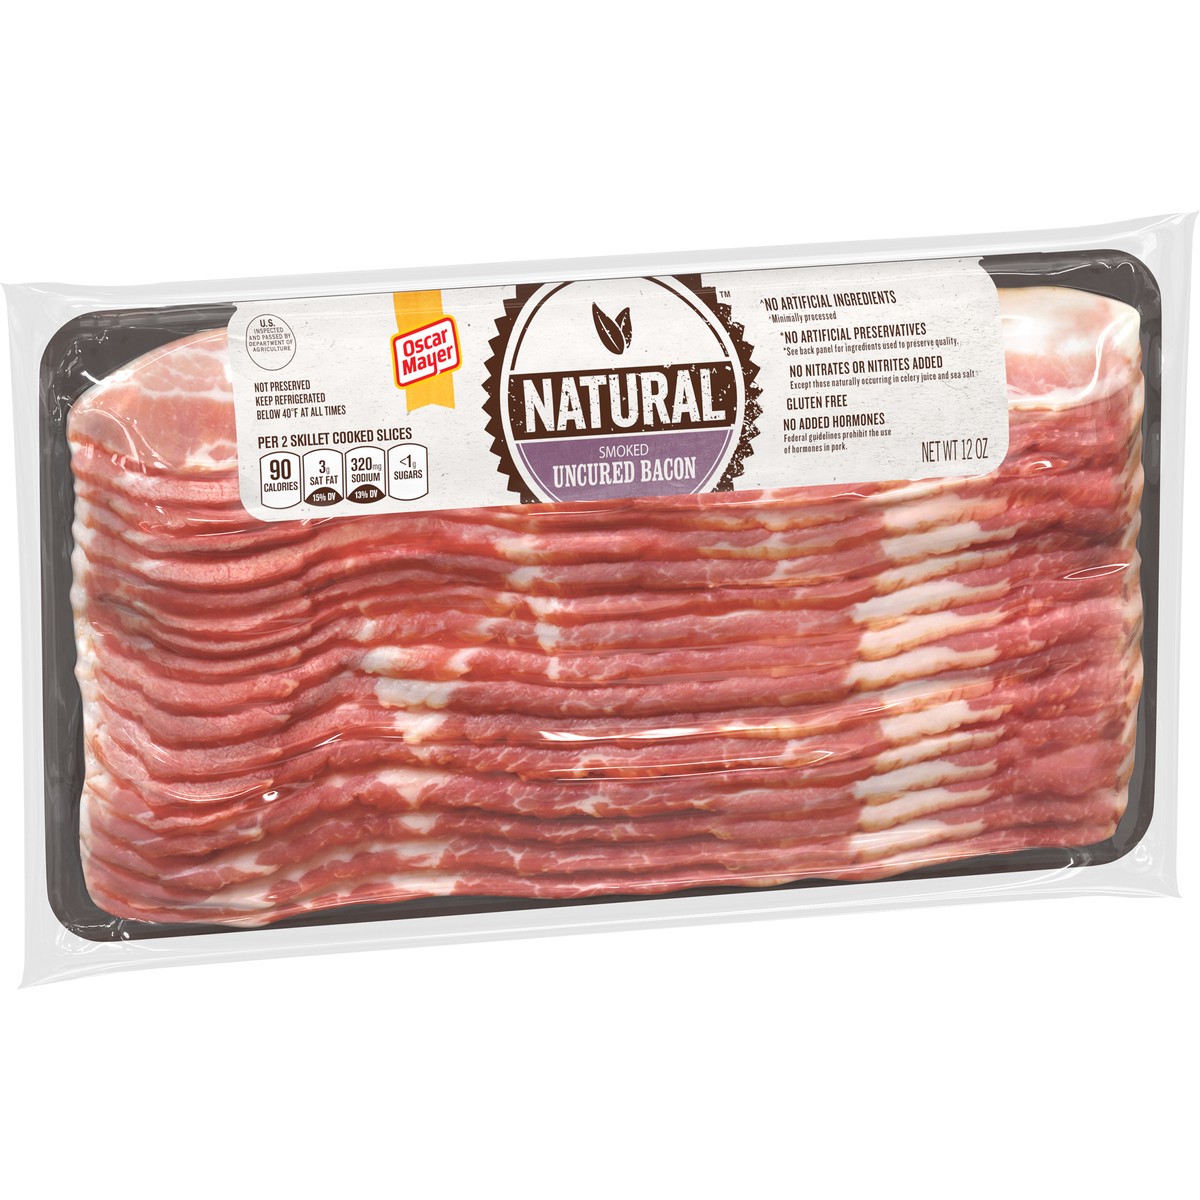 slide 3 of 8, Oscar Mayer Natural Smoked Uncured Bacon, 12 oz Pack, 13-15 slices, 12 oz